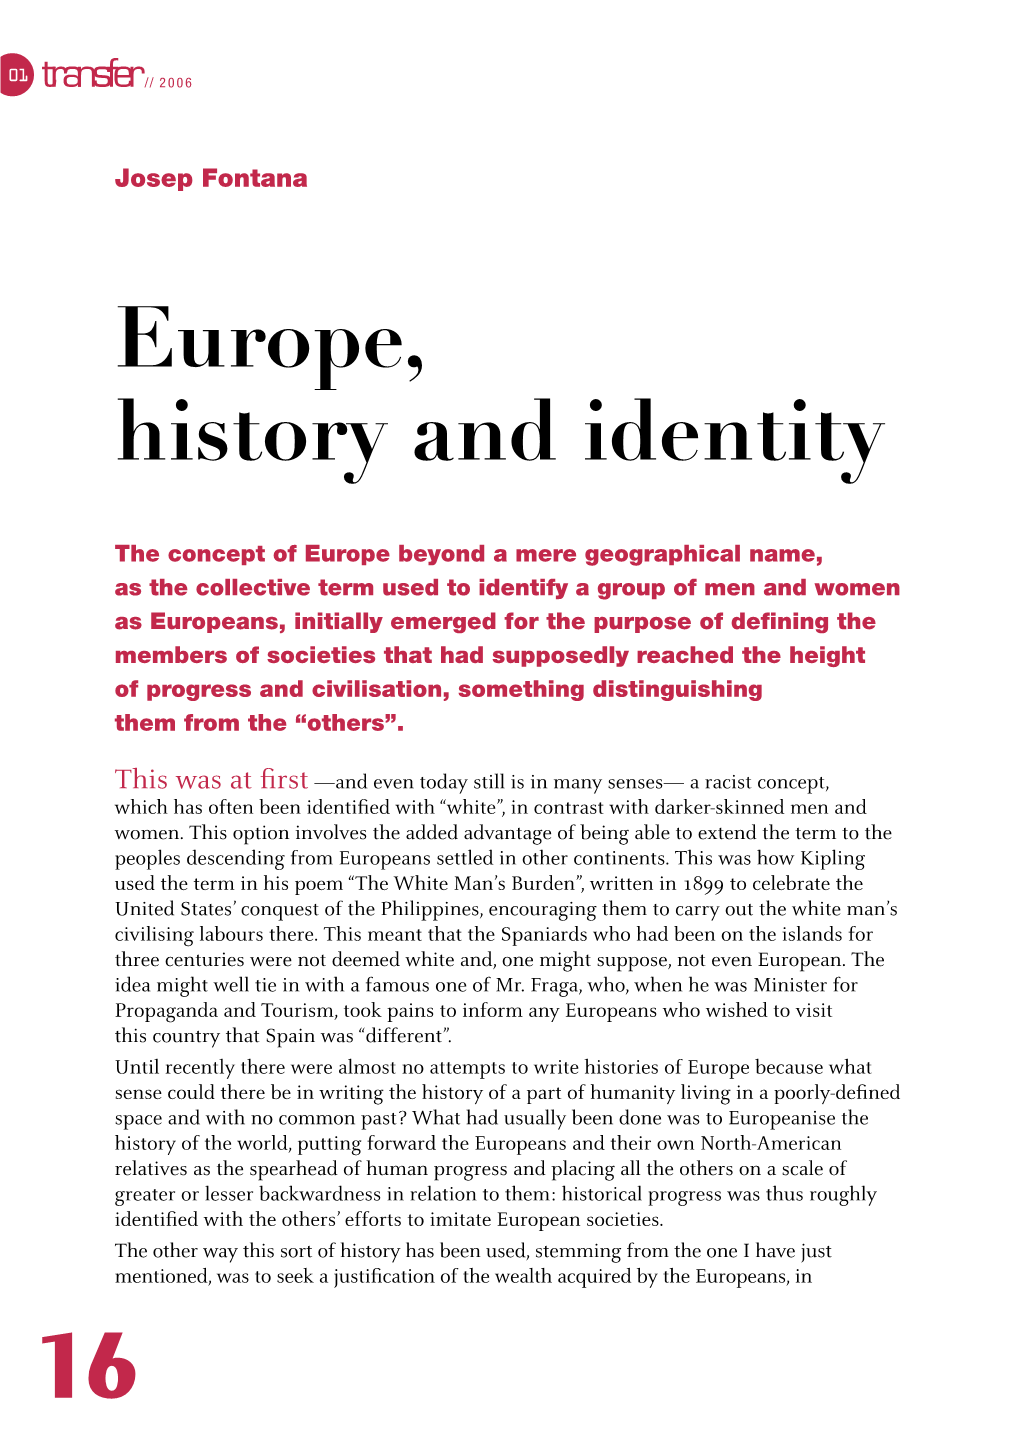 Europe, History and Identity